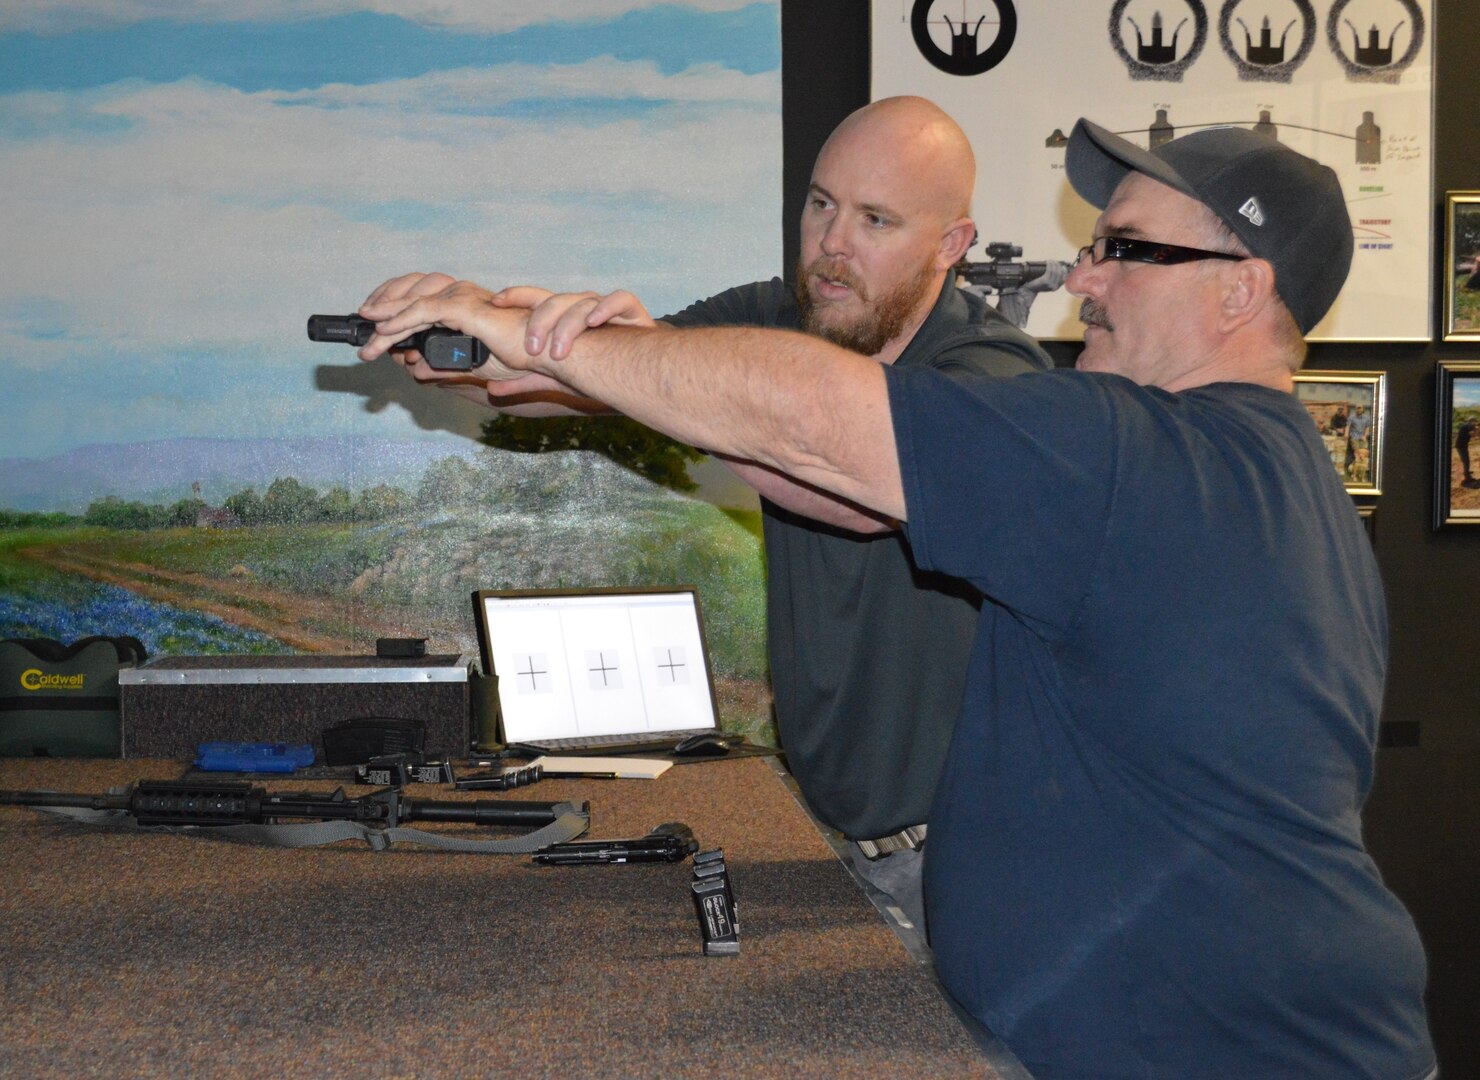 Scott Fitzgerald (left), Firearms Training Simulator instructor, works with David Colbath (right) on his hand positioning Feb. 15, 2018 at the Center for the Intrepid at Joint Base San Antonio-Fort Sam Houston. As part of his rehab at the CFI, Colbath, an avid hunter, is working with Fitzgerald to learn how to shoot left handed. Fitzgerald is helping Colbath with his hand/eye coordination and physical stance as he gets used to using his left hand as his dominant hand when shooting a gun.